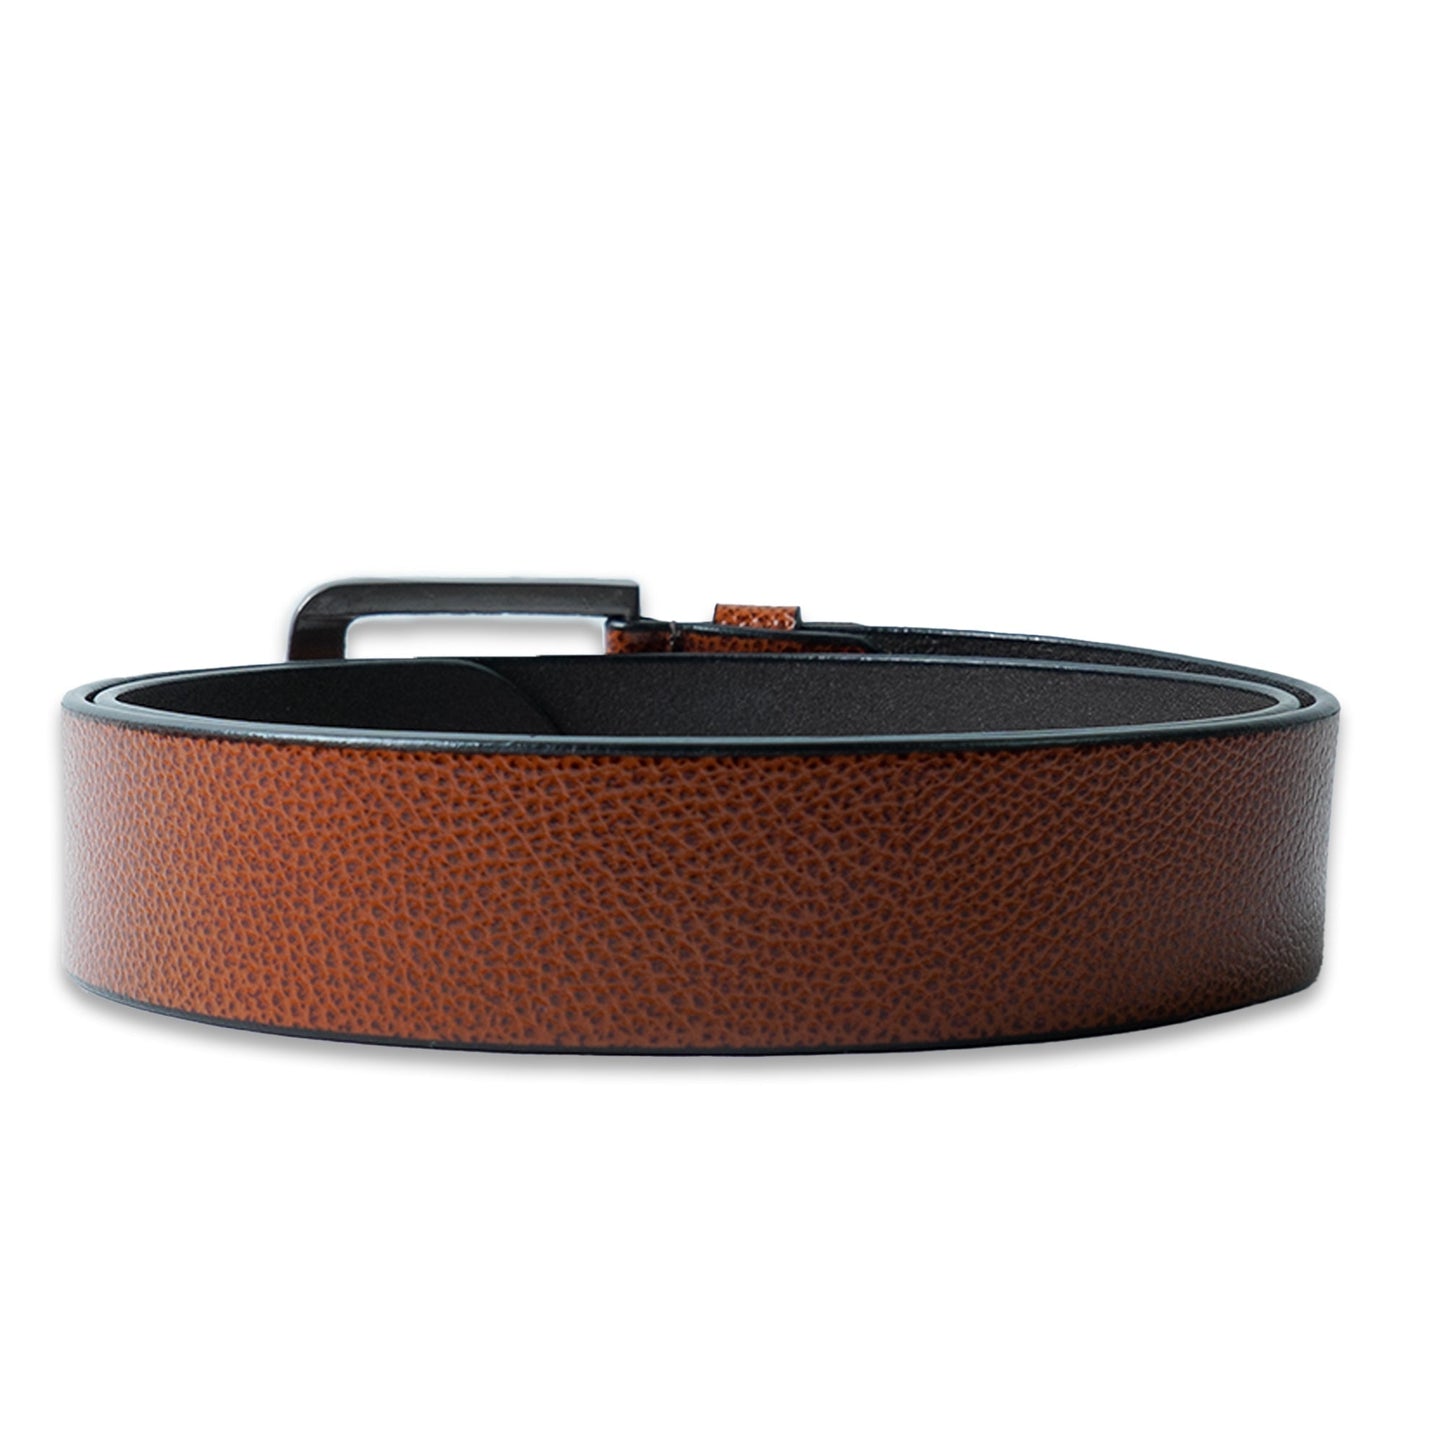 Casual Leather Belt For Jeans